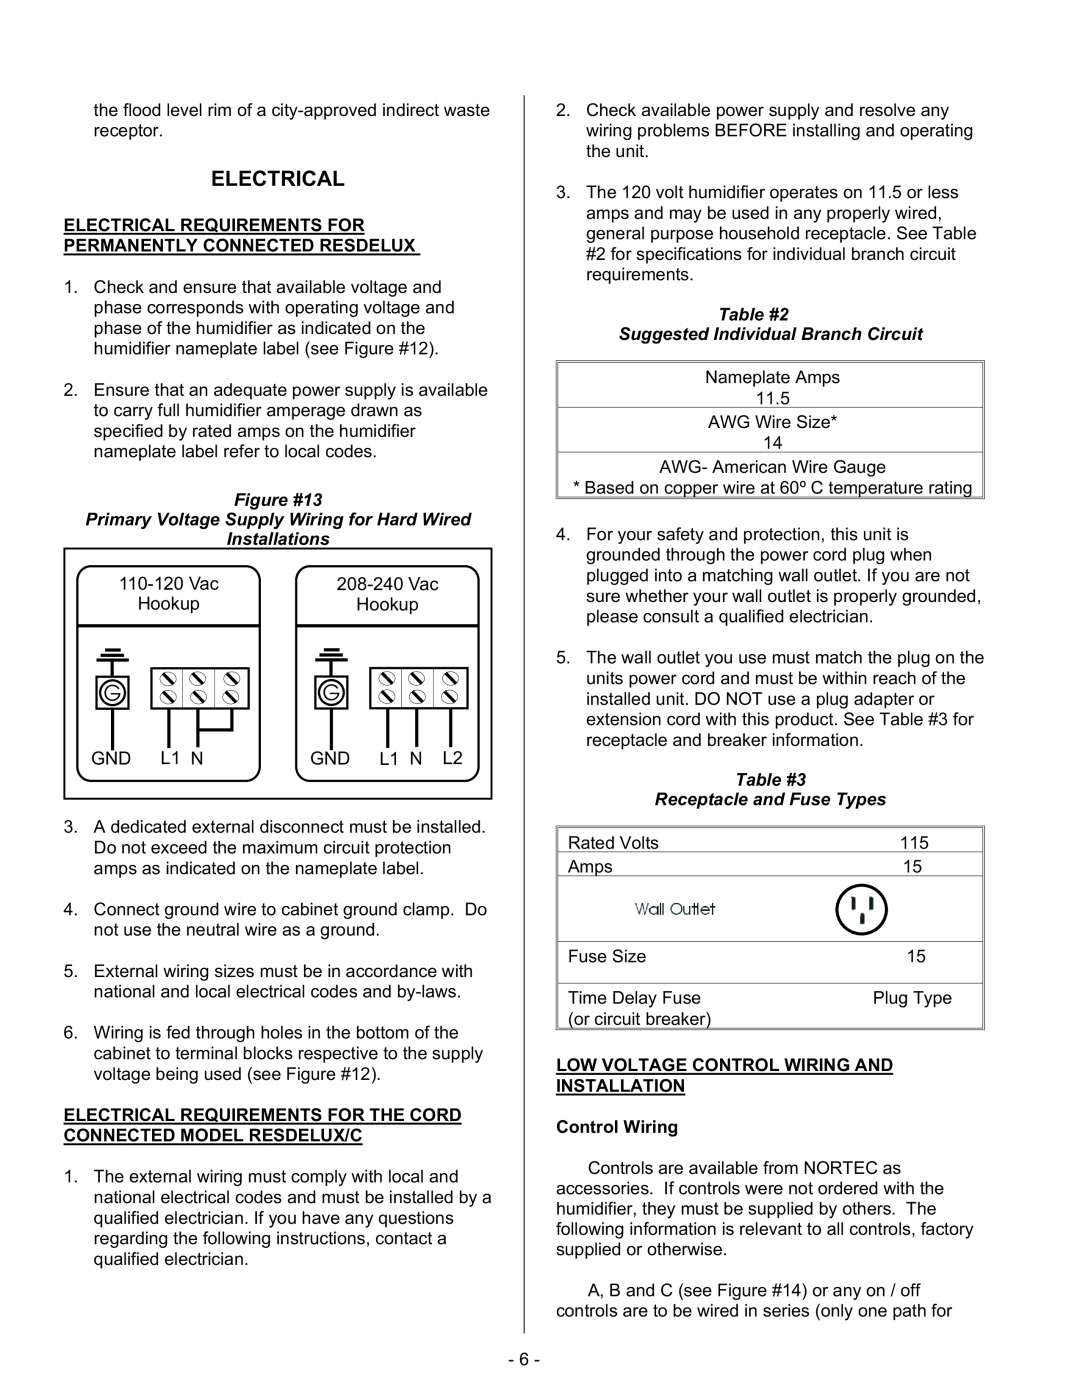 Nortec Steam Humidifiers manual Electrical, L1 N, Figure #13, Primary Voltage Supply Wiring for Hard Wired, Installations 